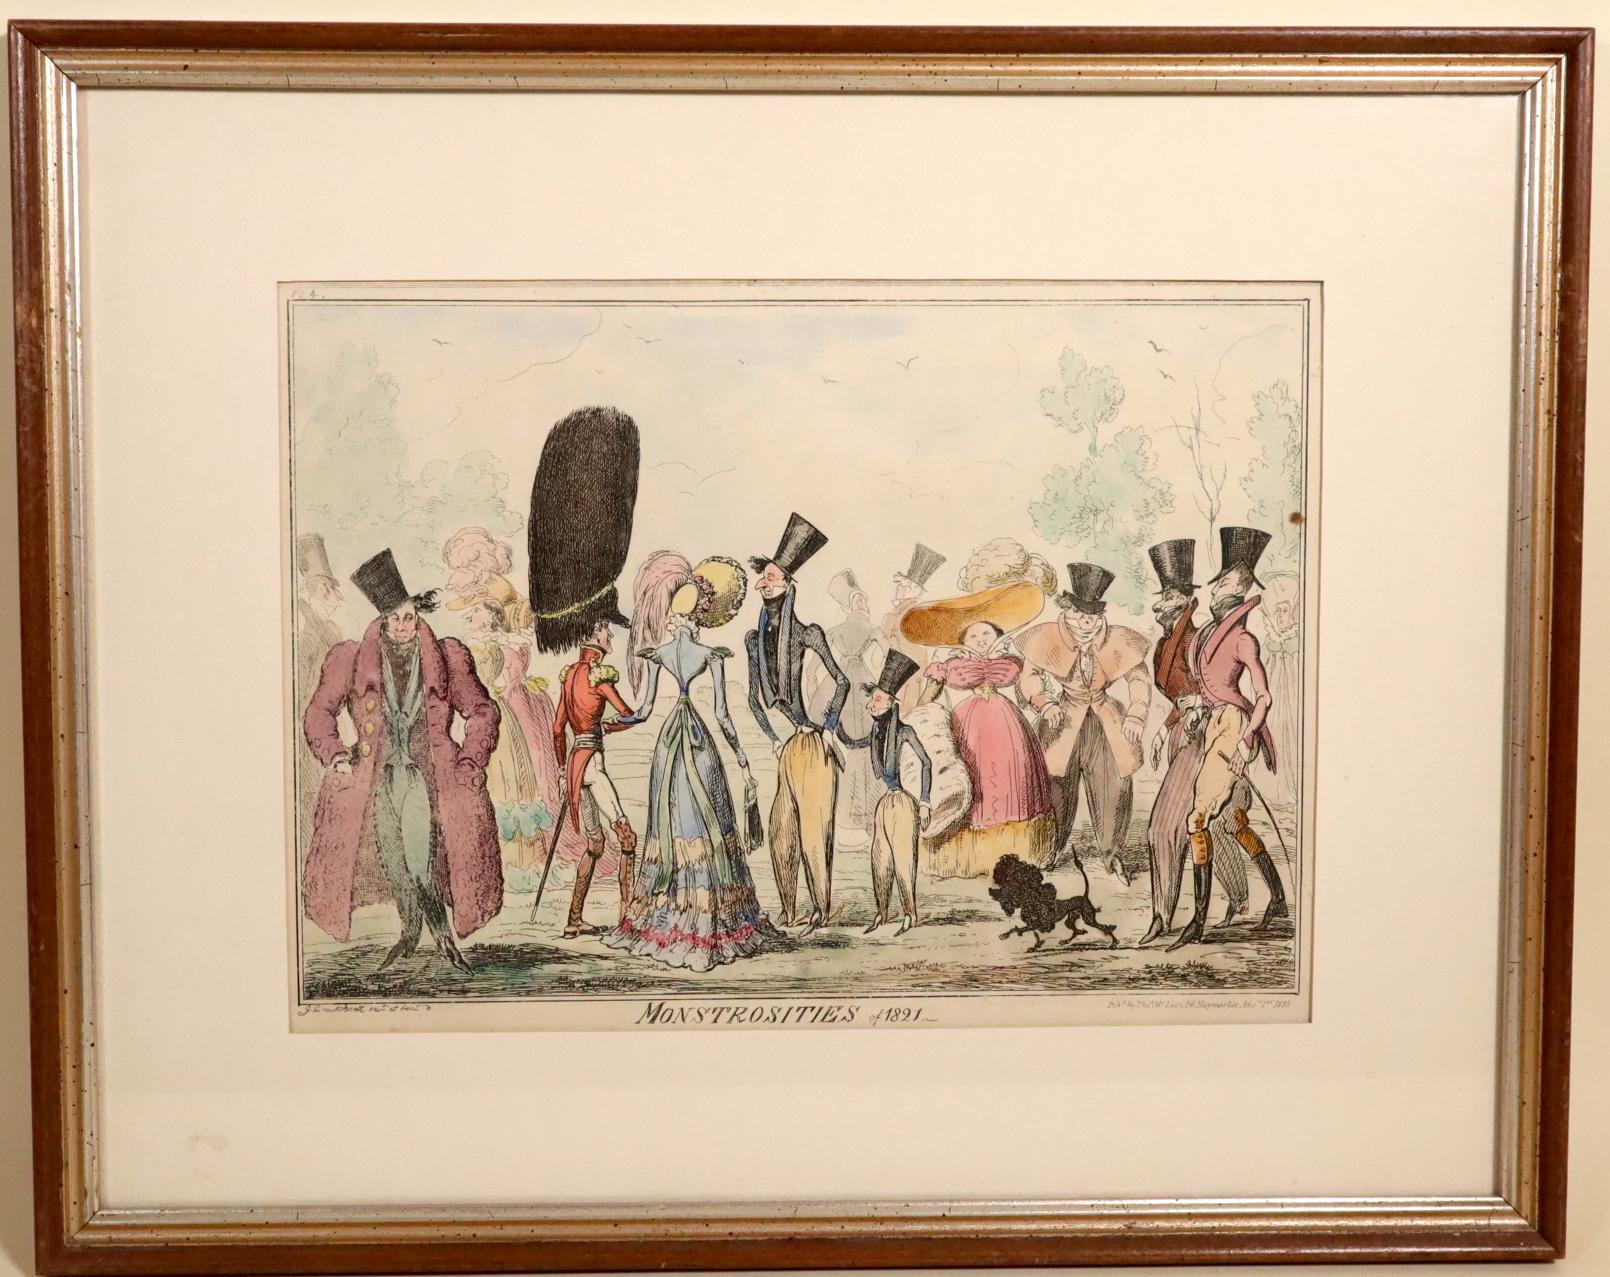 Monstrosities of 1821 etching with hand coloring urban satire pub 1835 For Sale 3